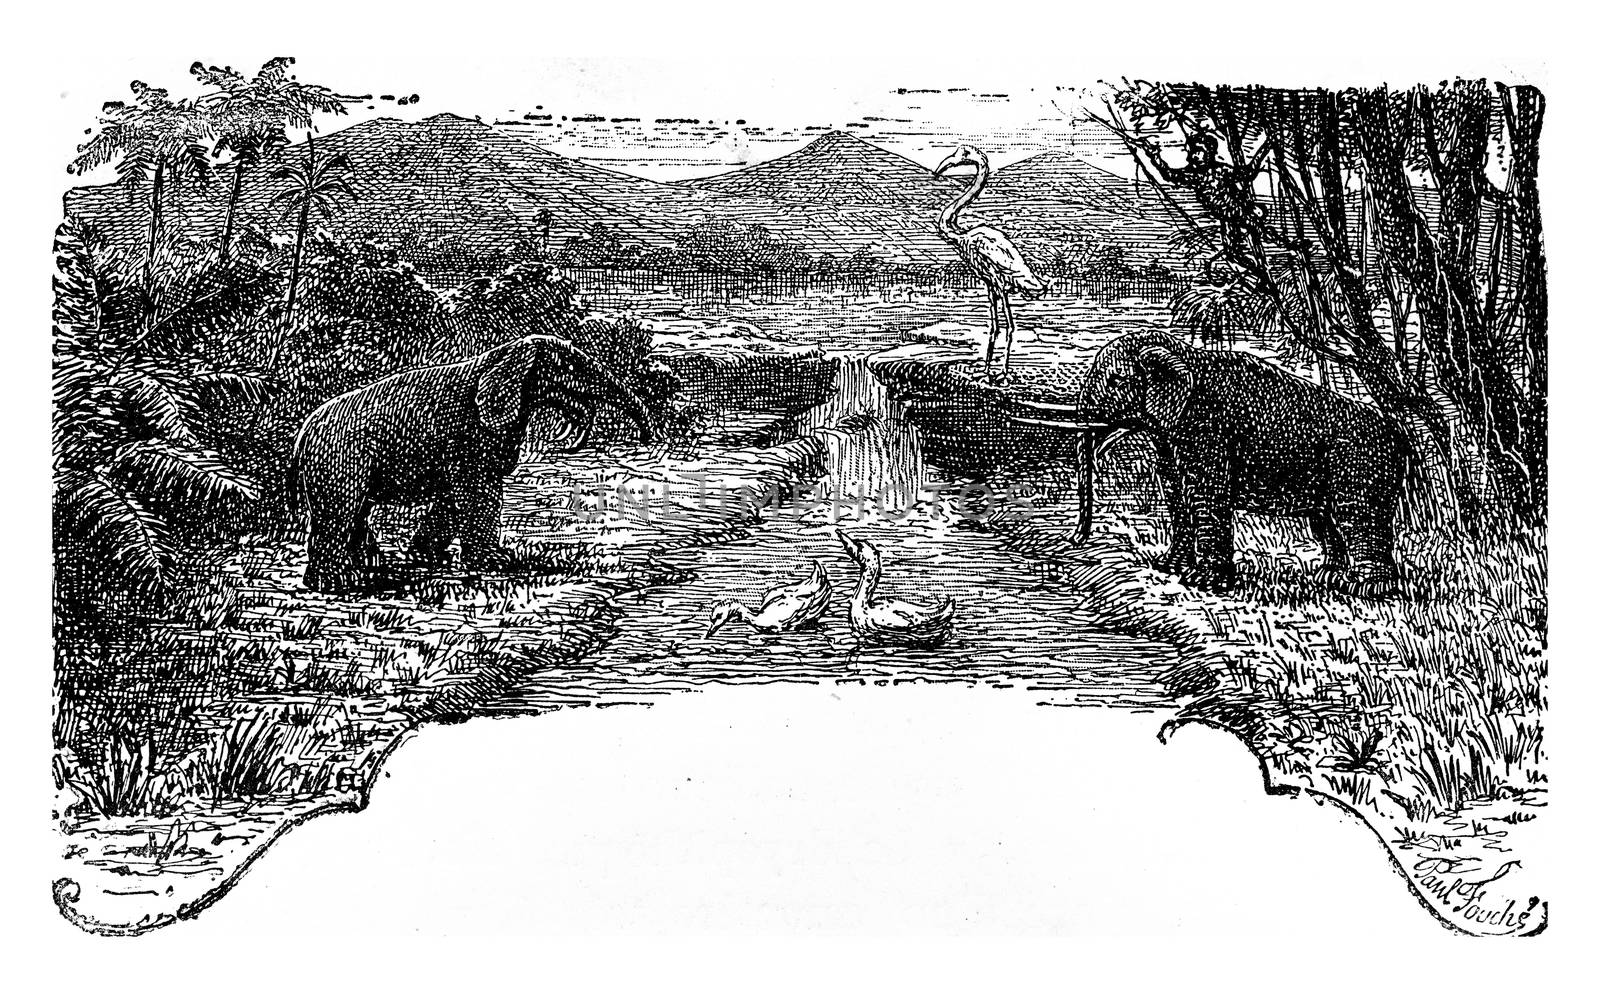 The Pliocene period, vintage engraving. by Morphart